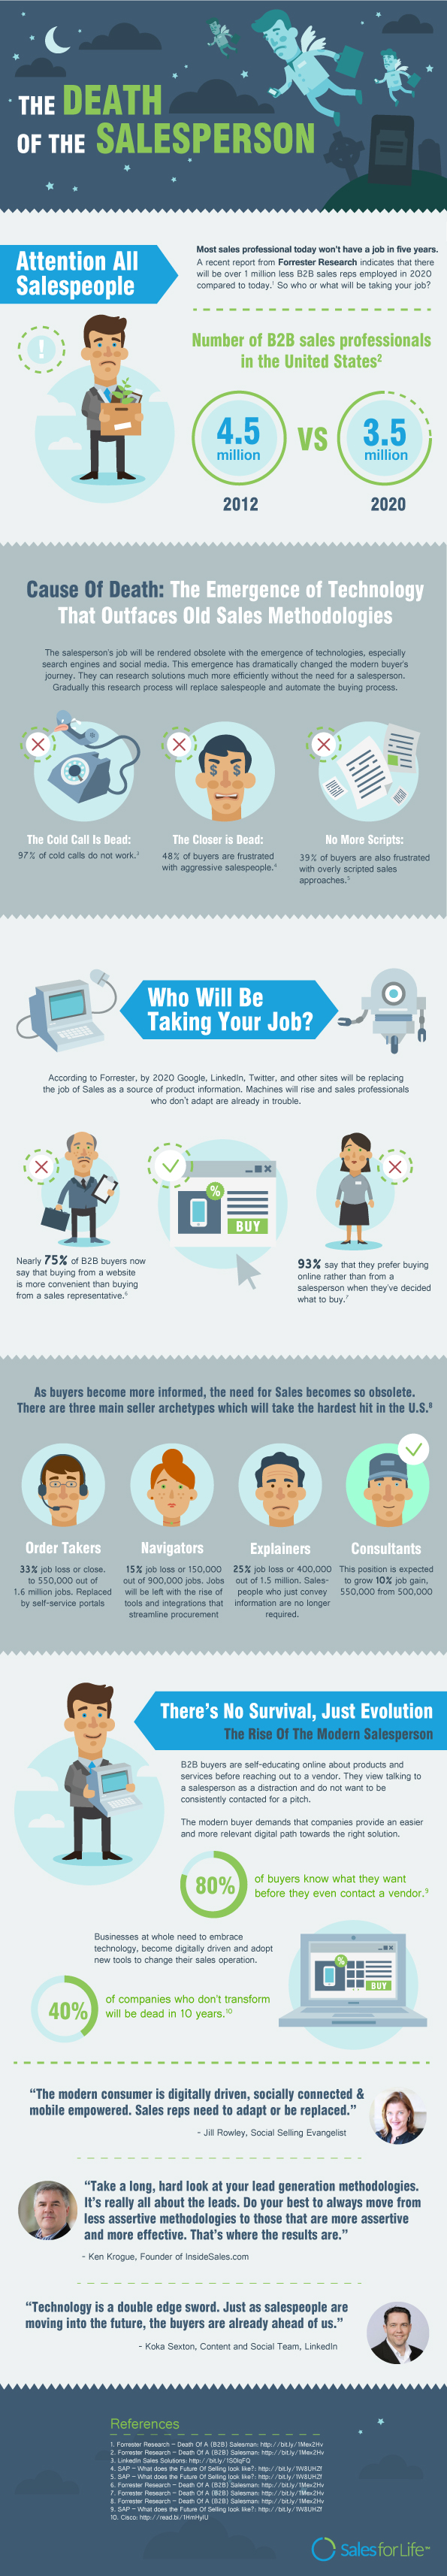 the-death-of-the-salesperson-social-selling-infographic